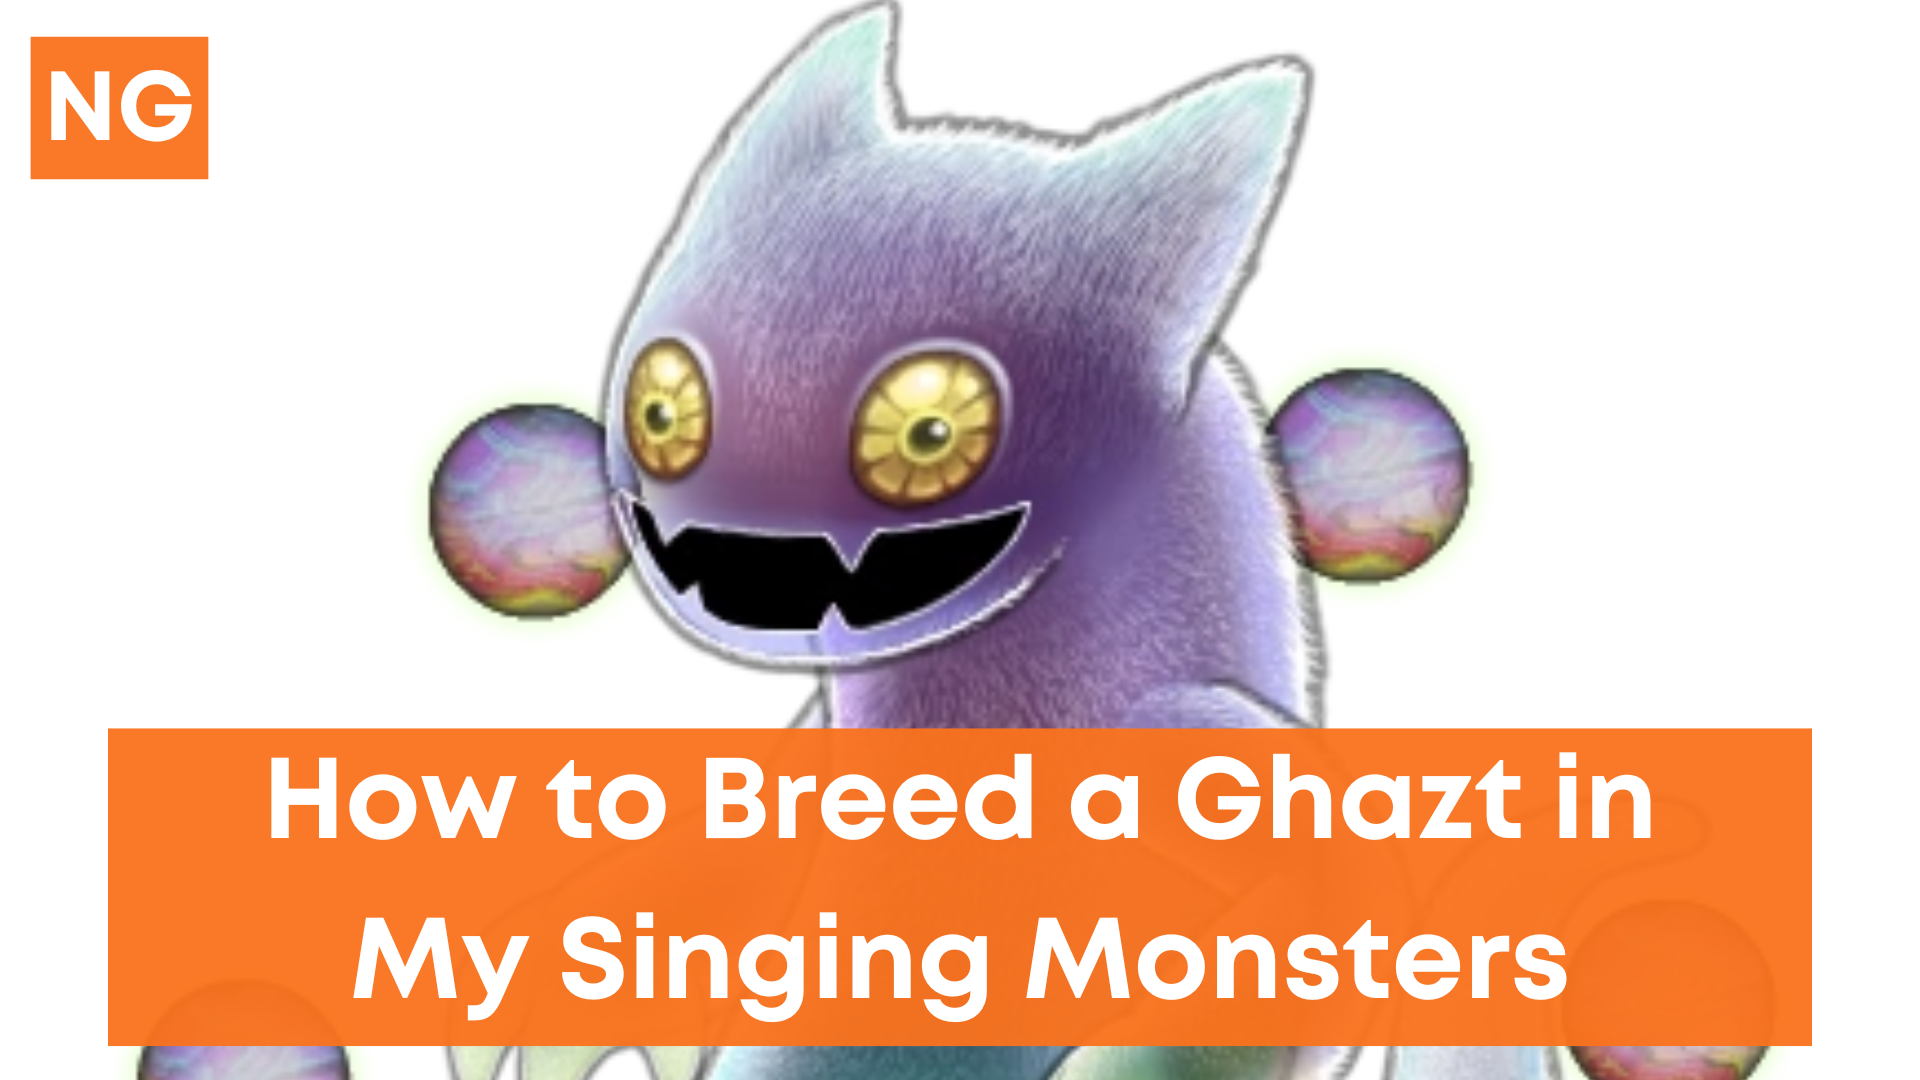 How to breed ghazt